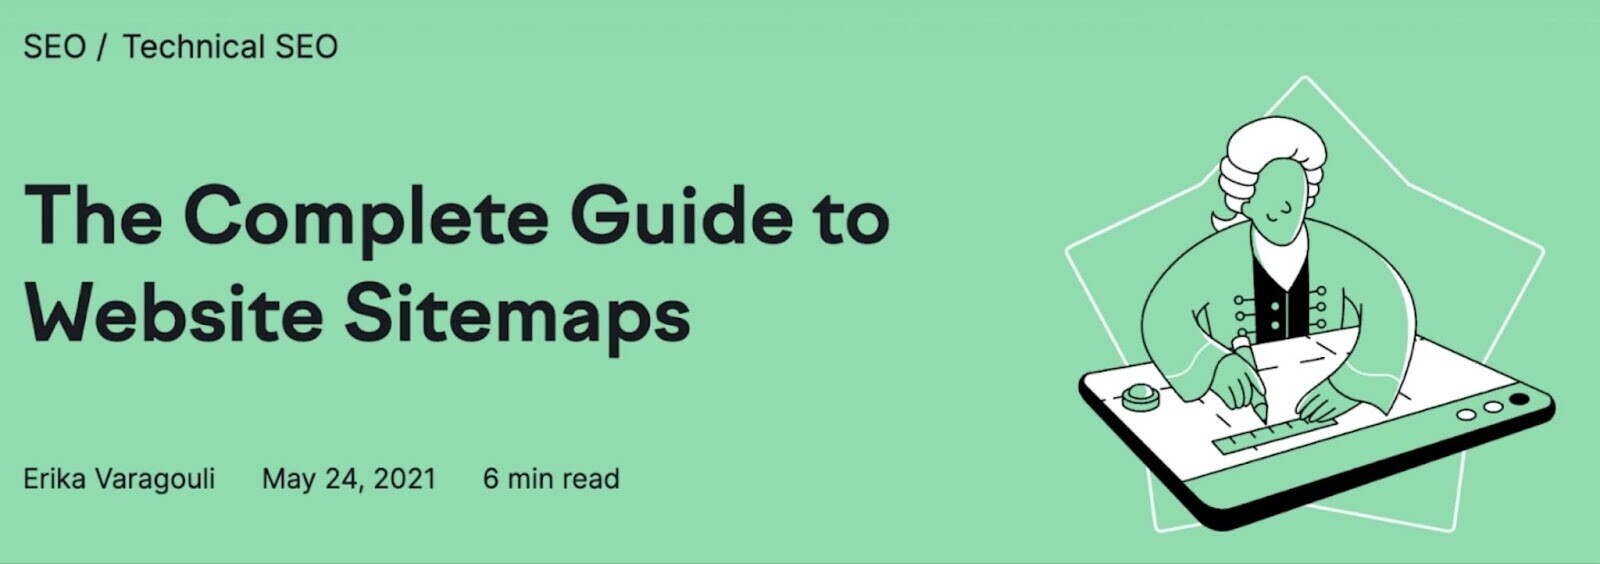 "The Complete Guide to Website Sitemaps" title